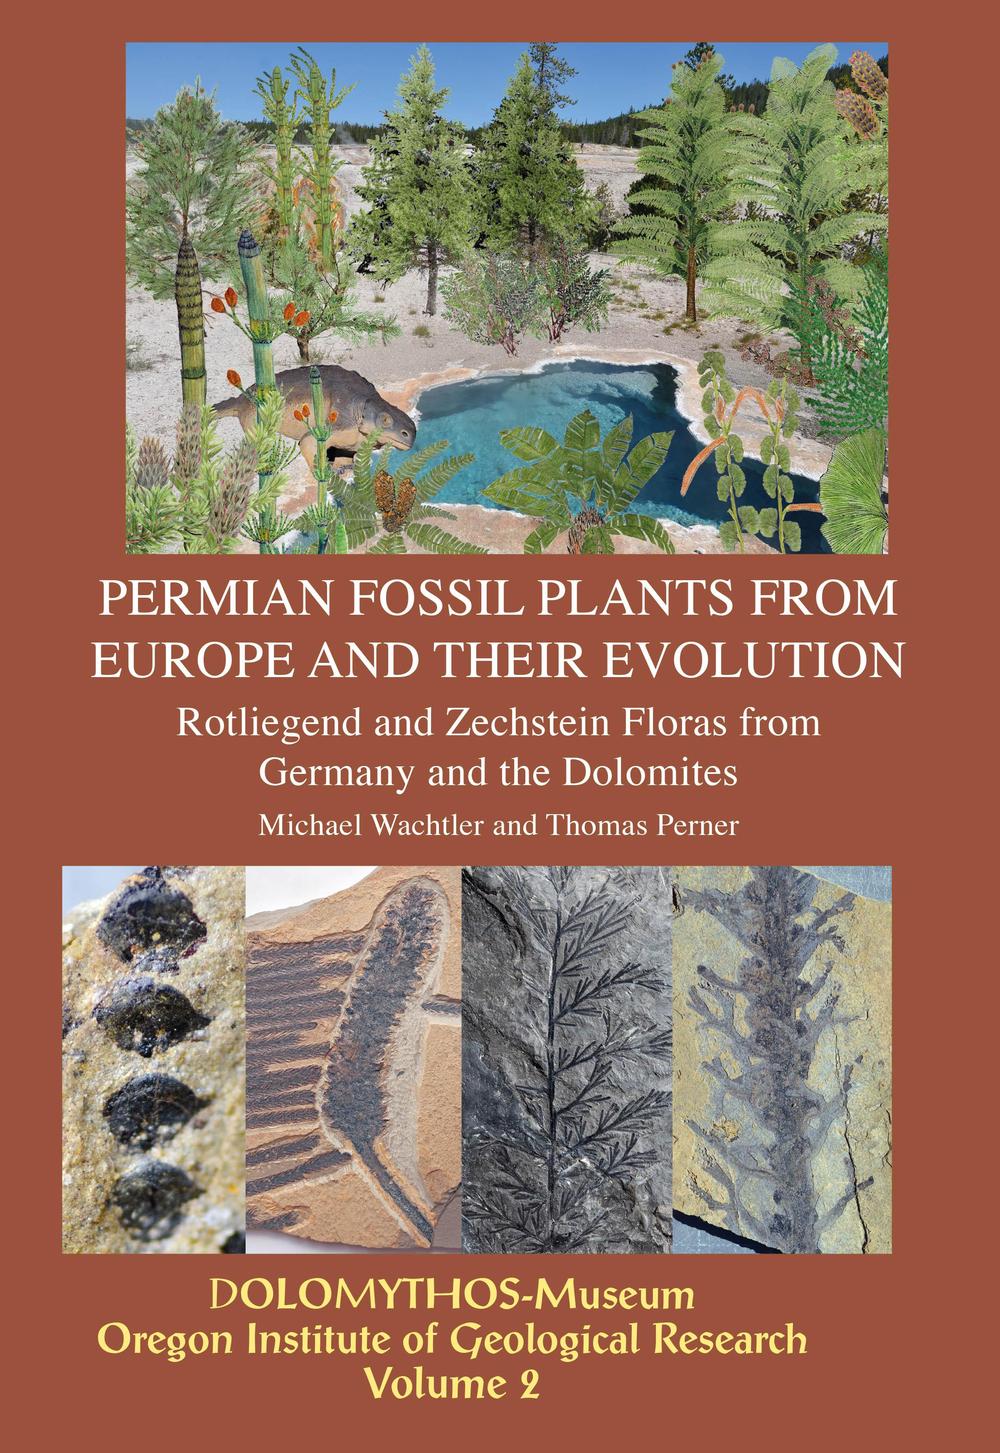 Fossil permain plants from Europe and their evolution 0173Rotliegend and Zechstein-Floras from Germany and the Dolomites. Ediz. bilingue